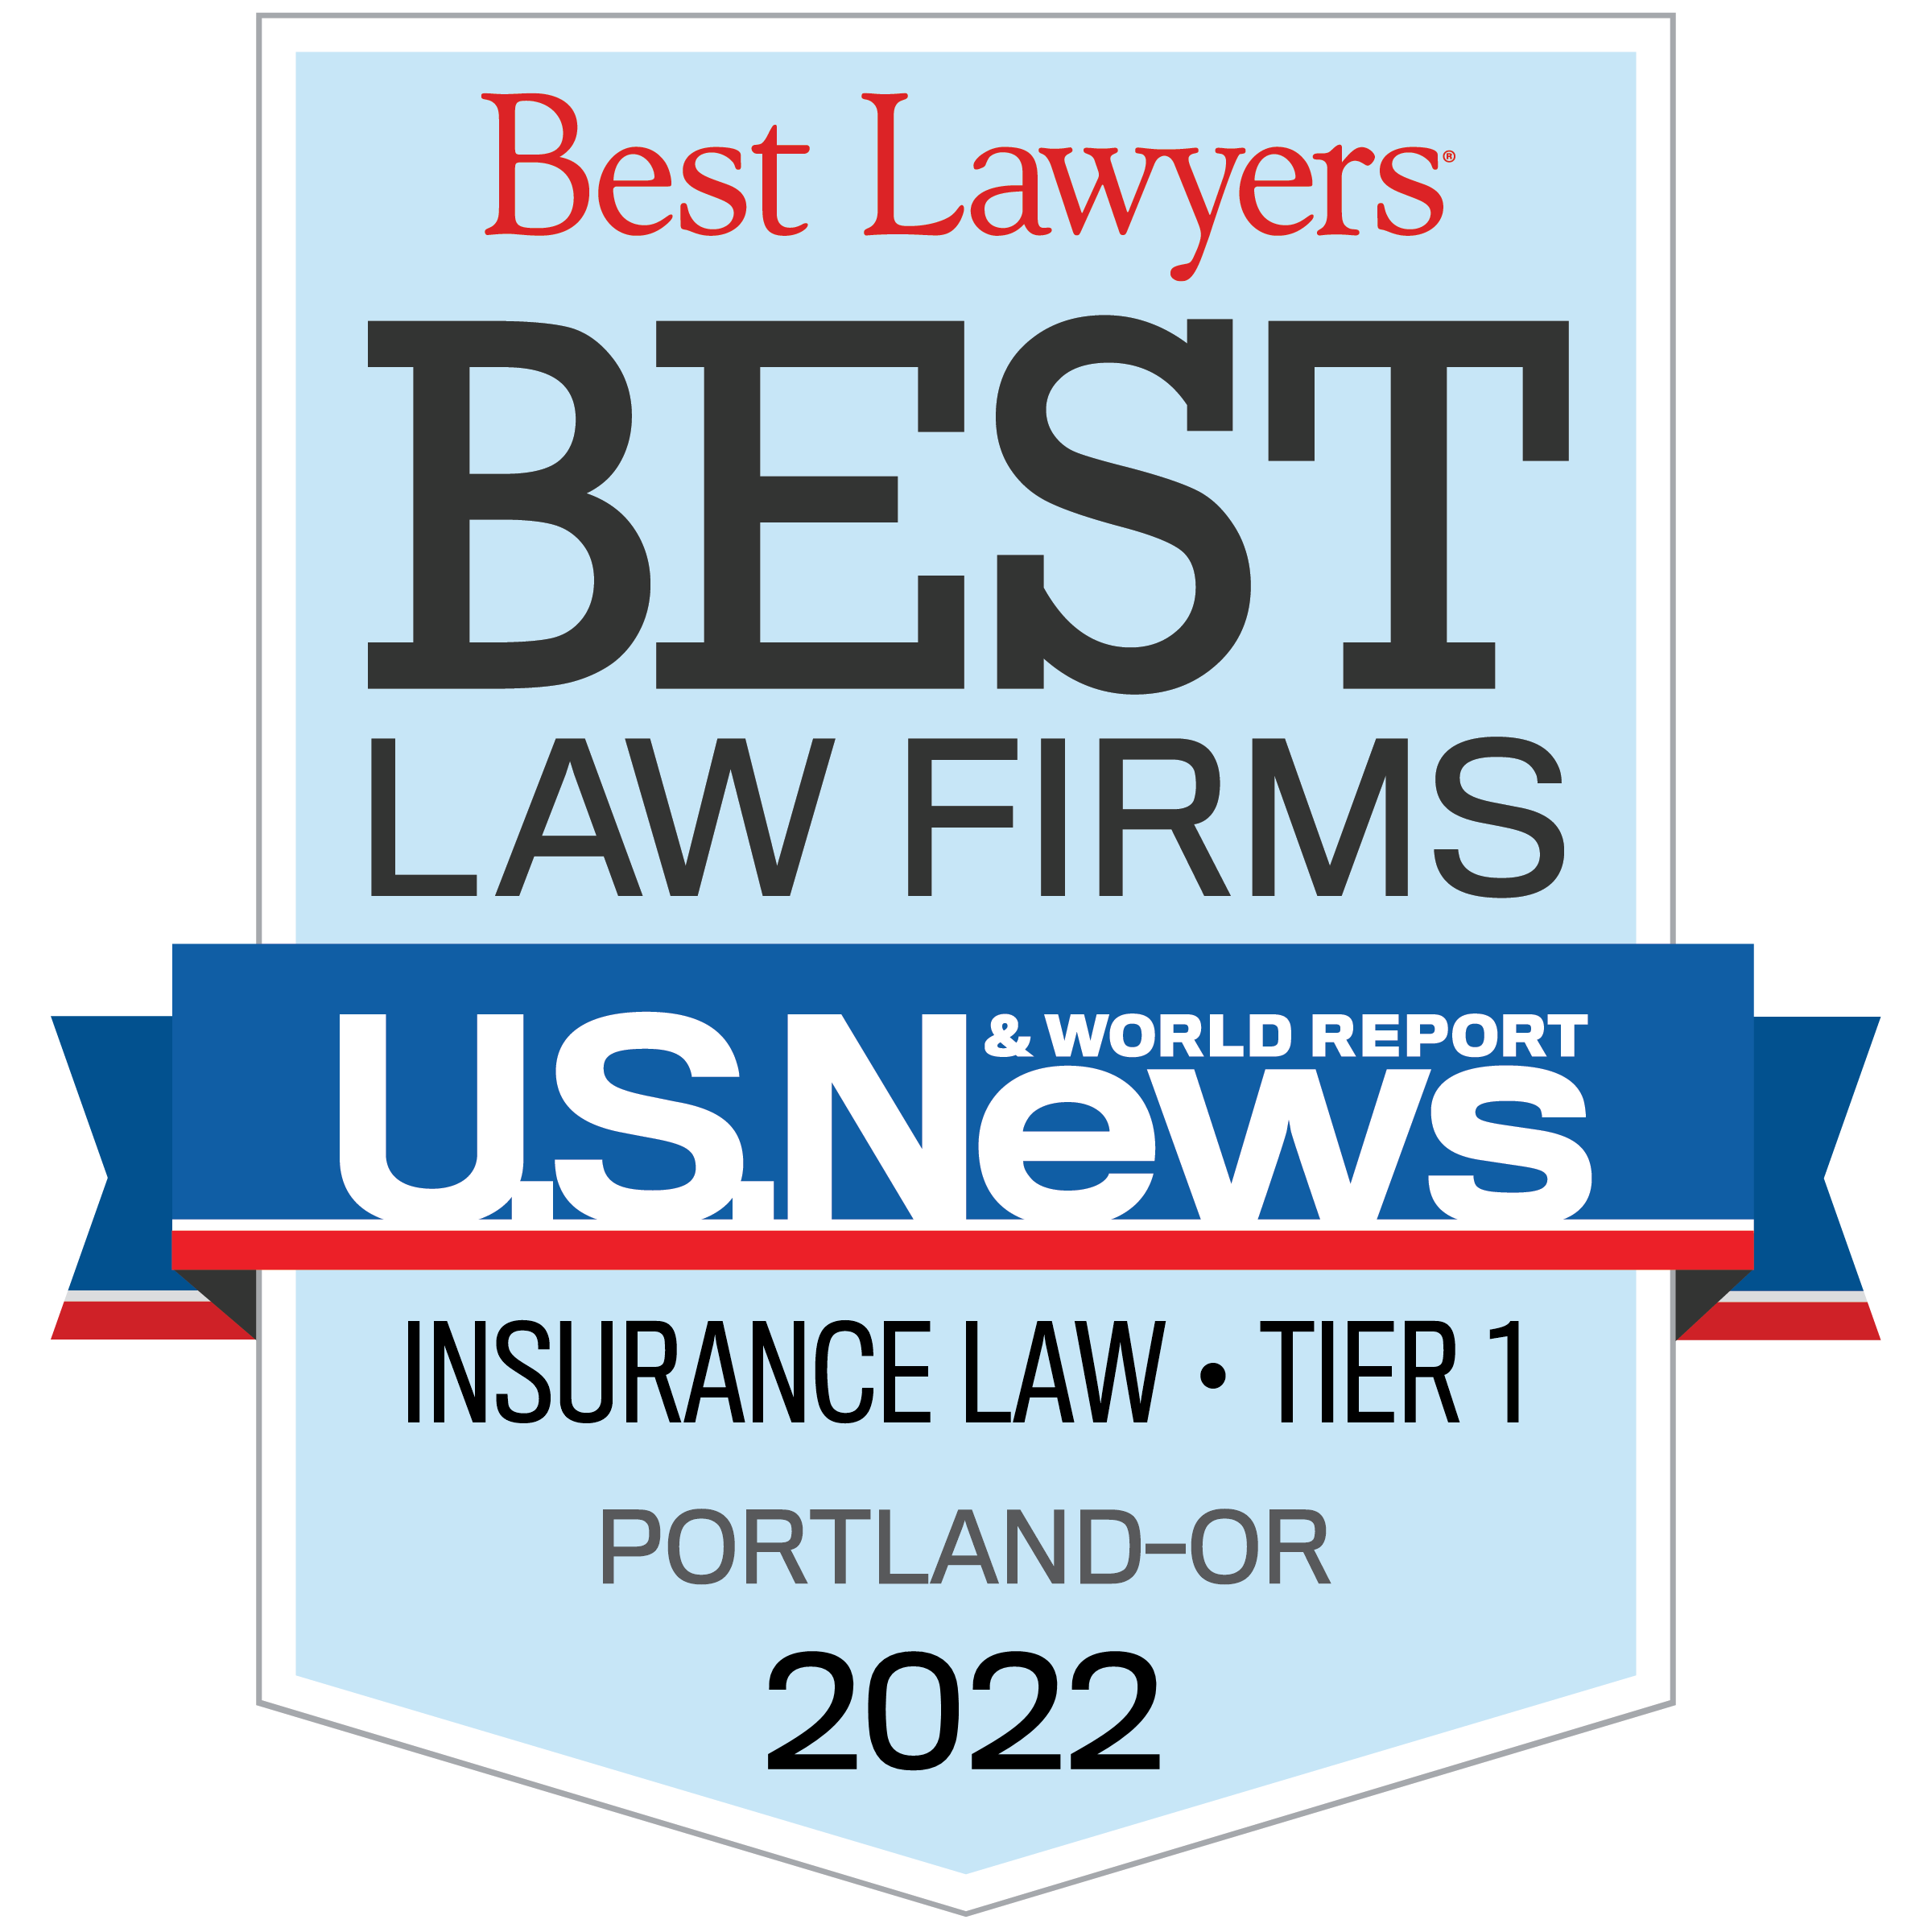 Best Lawyers Best Law Firms U. S. News and World Report Litigation-Insurance Tier 1 Portland-OR 2022